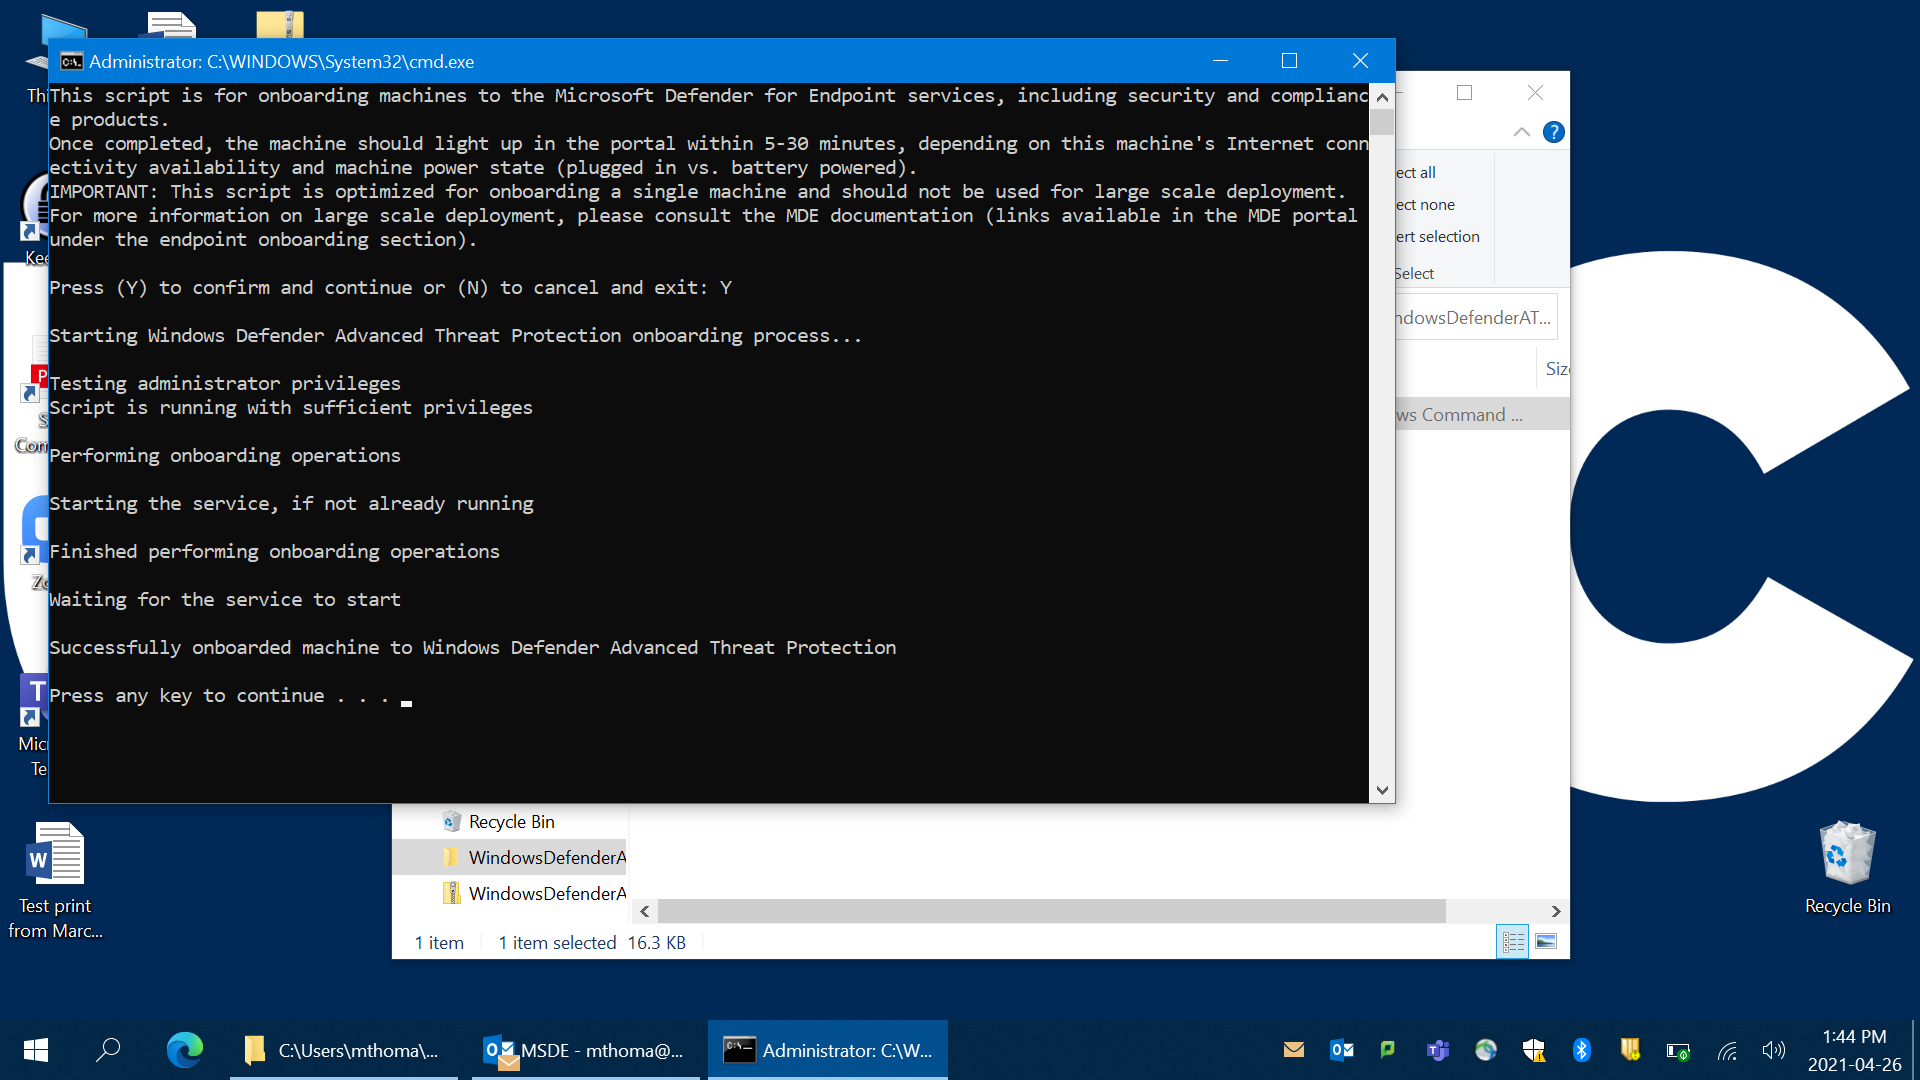 Install Microsoft Defender for Endpoint: Windows - University of Victoria